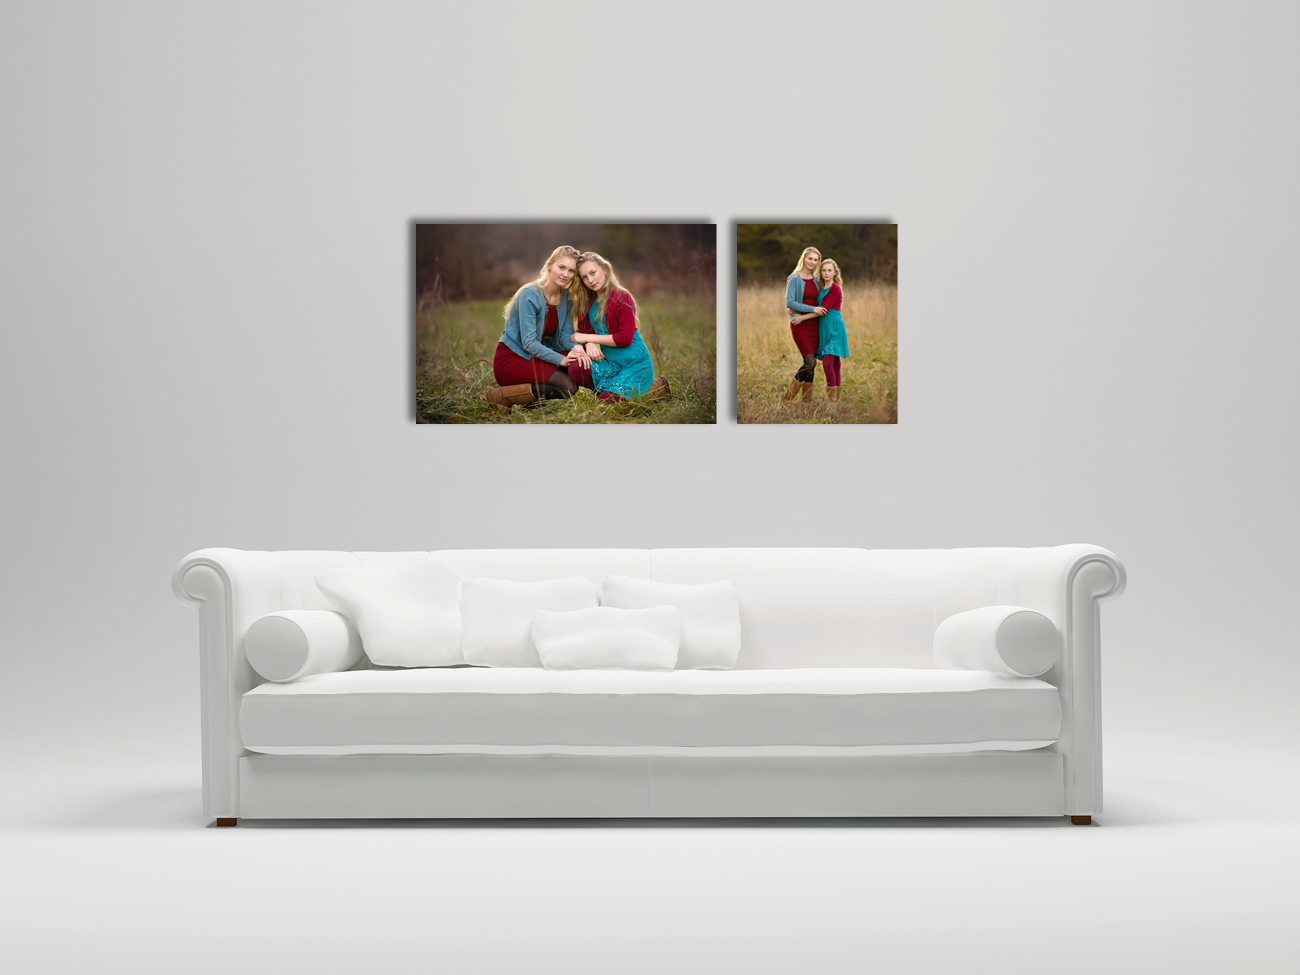 Wall photo display grouping in 20x30 and 16x20 size.